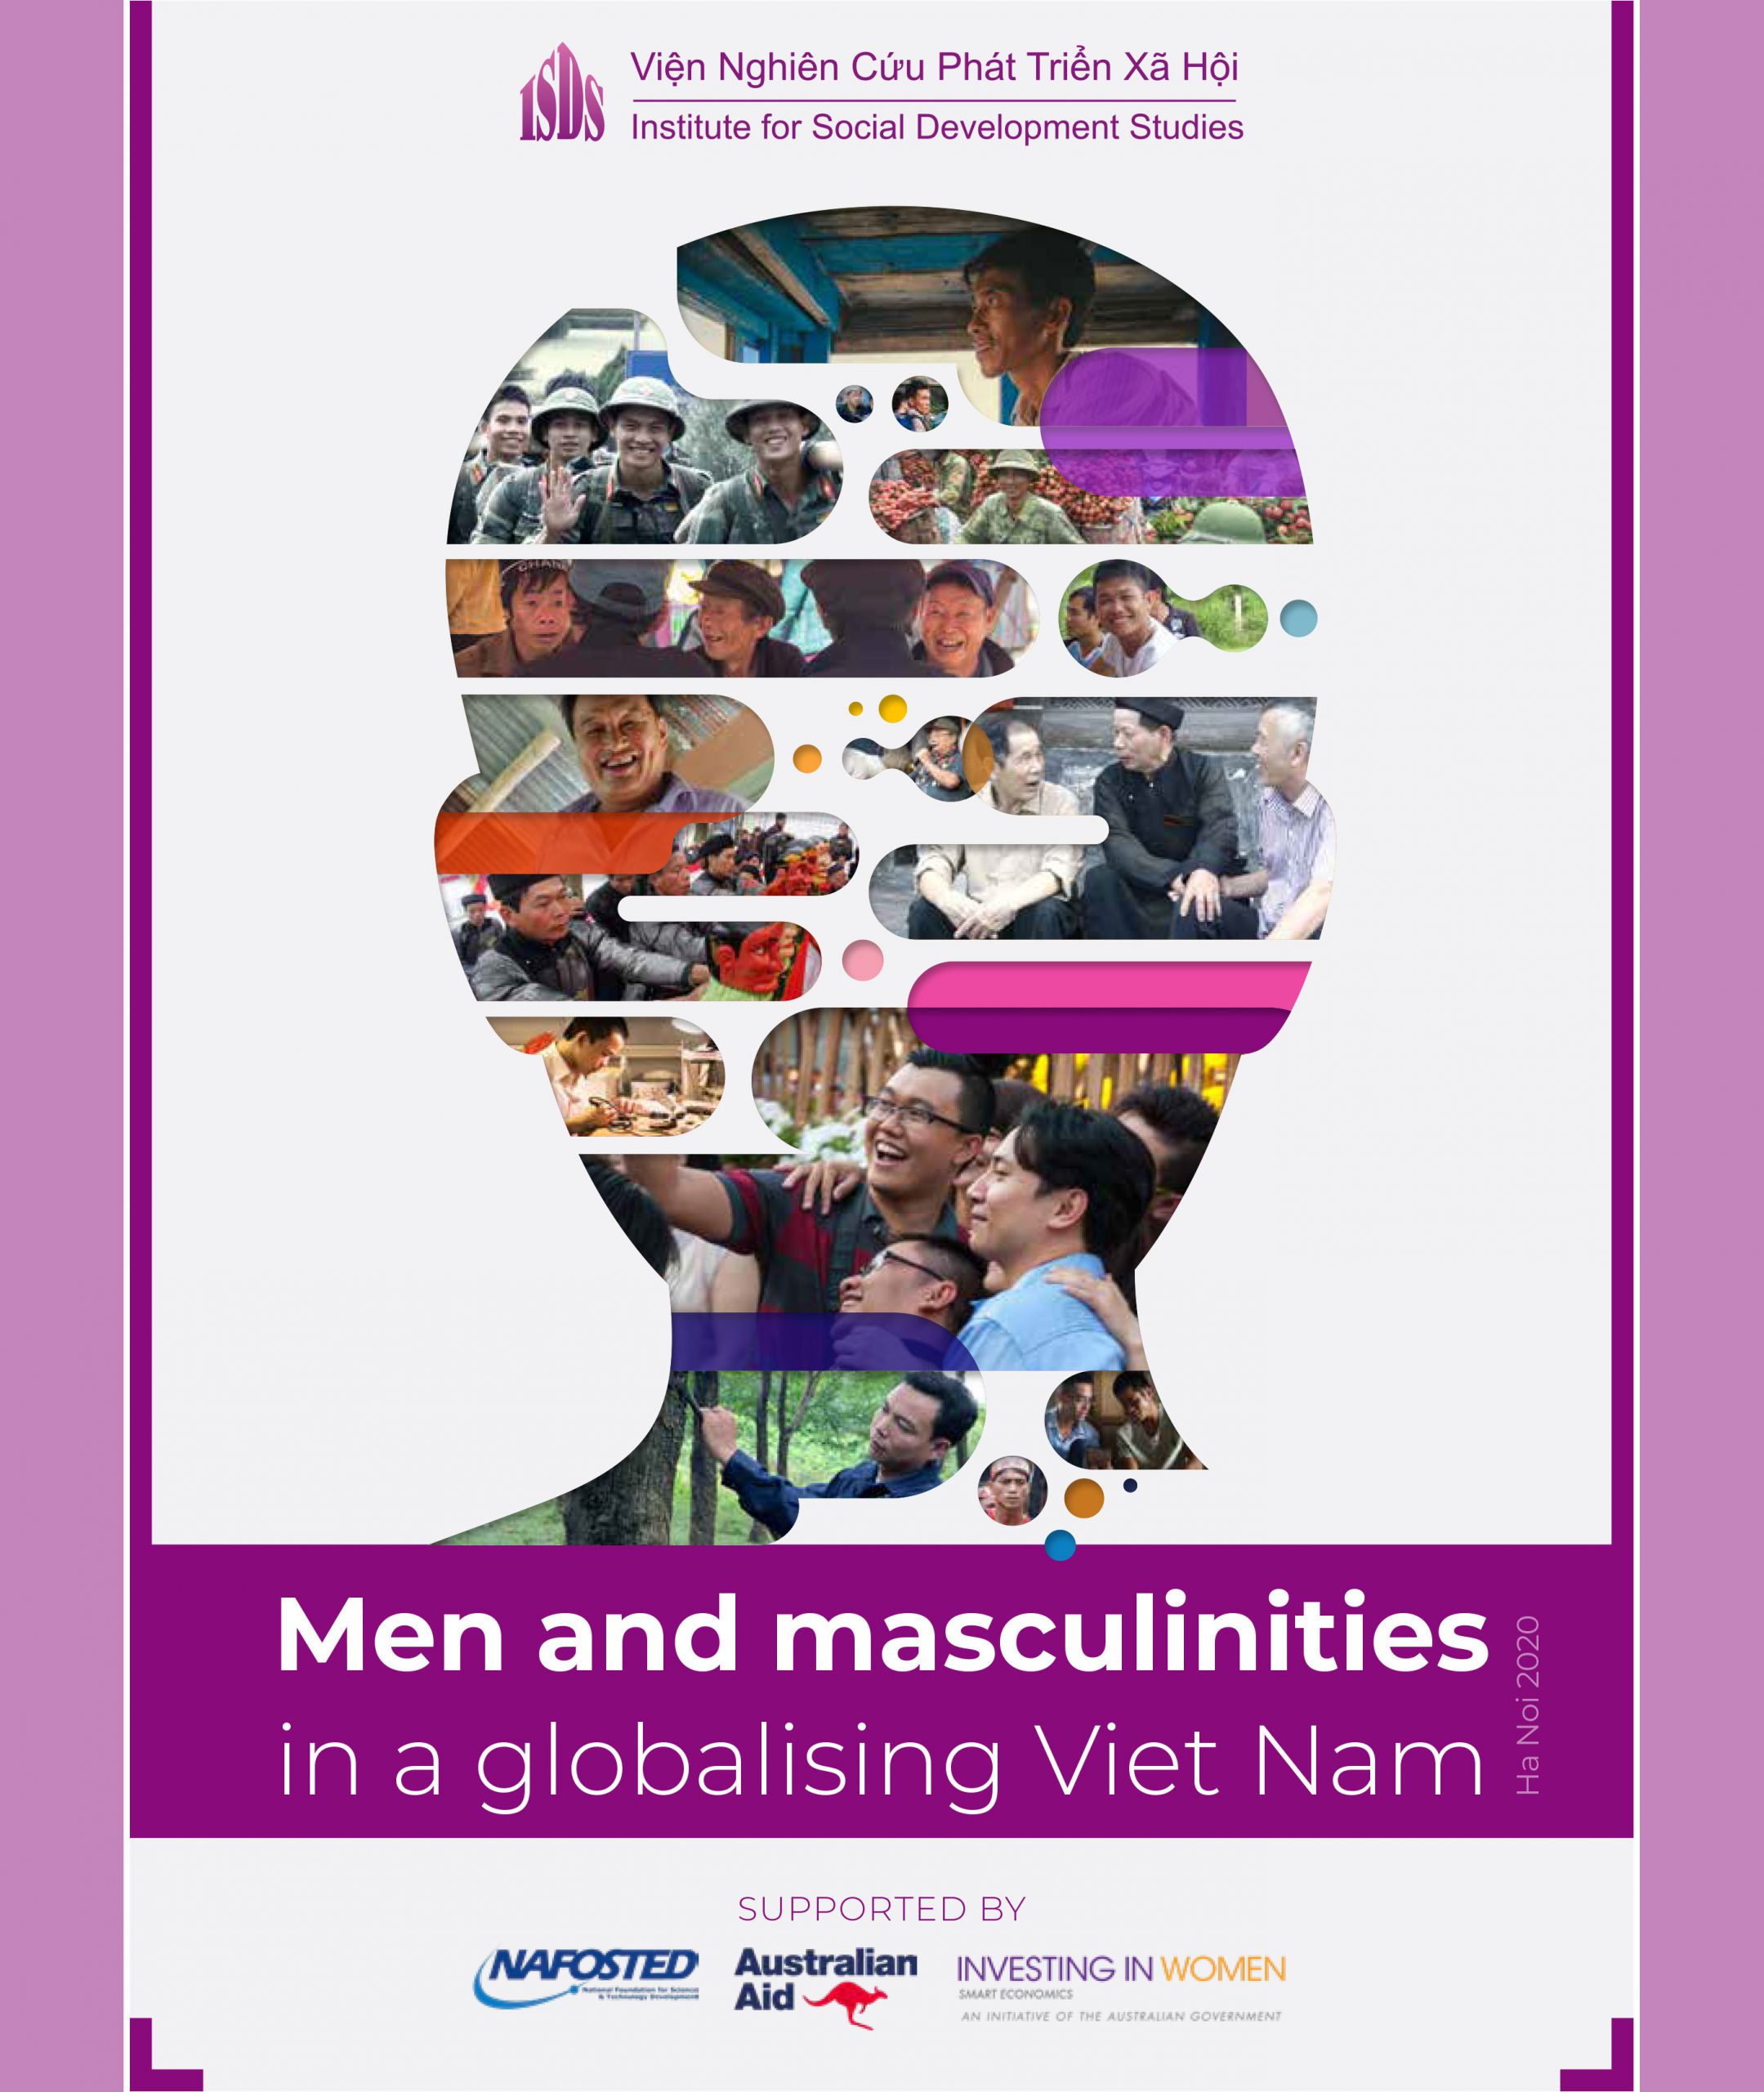 Men and masculinities in a globalising Viet Nam